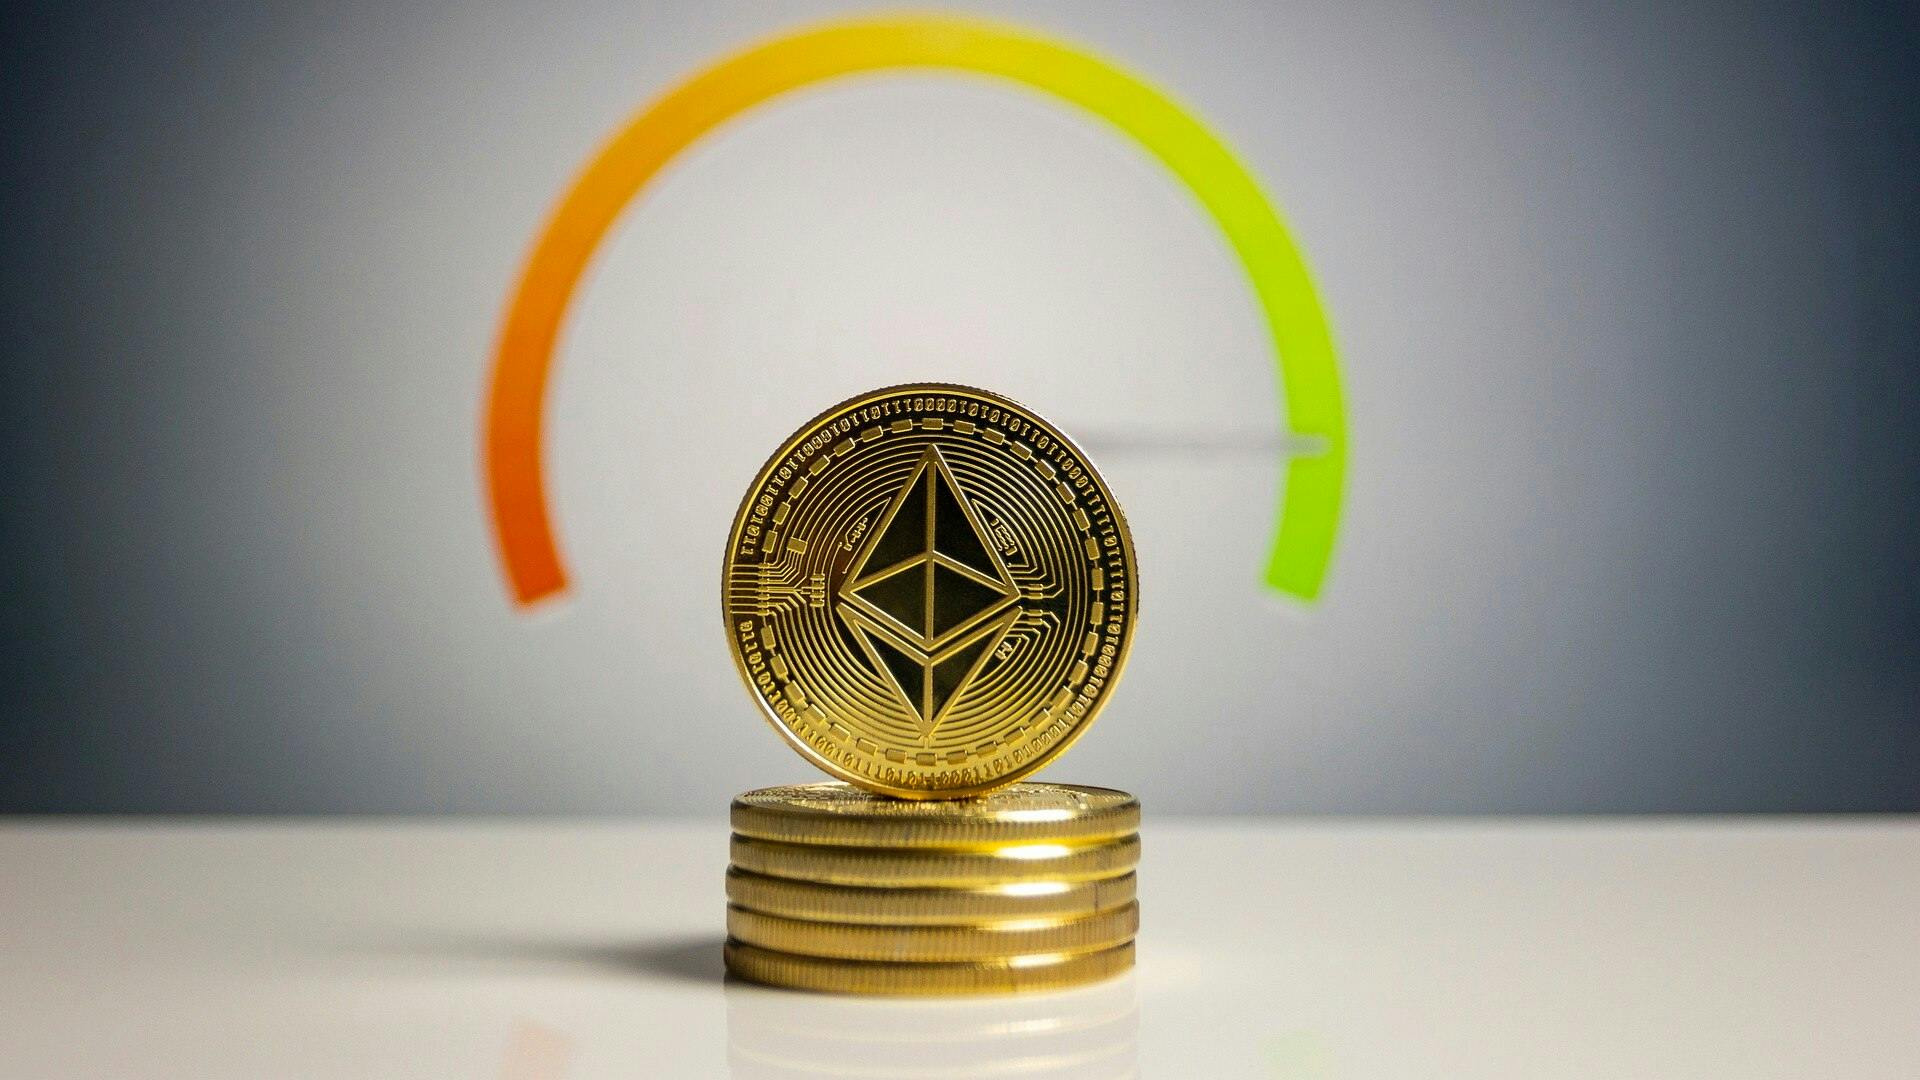 A golden Ethereum crypto coin sitting on its side on top of a stack of other golden coins in front of a gauge pointing green.